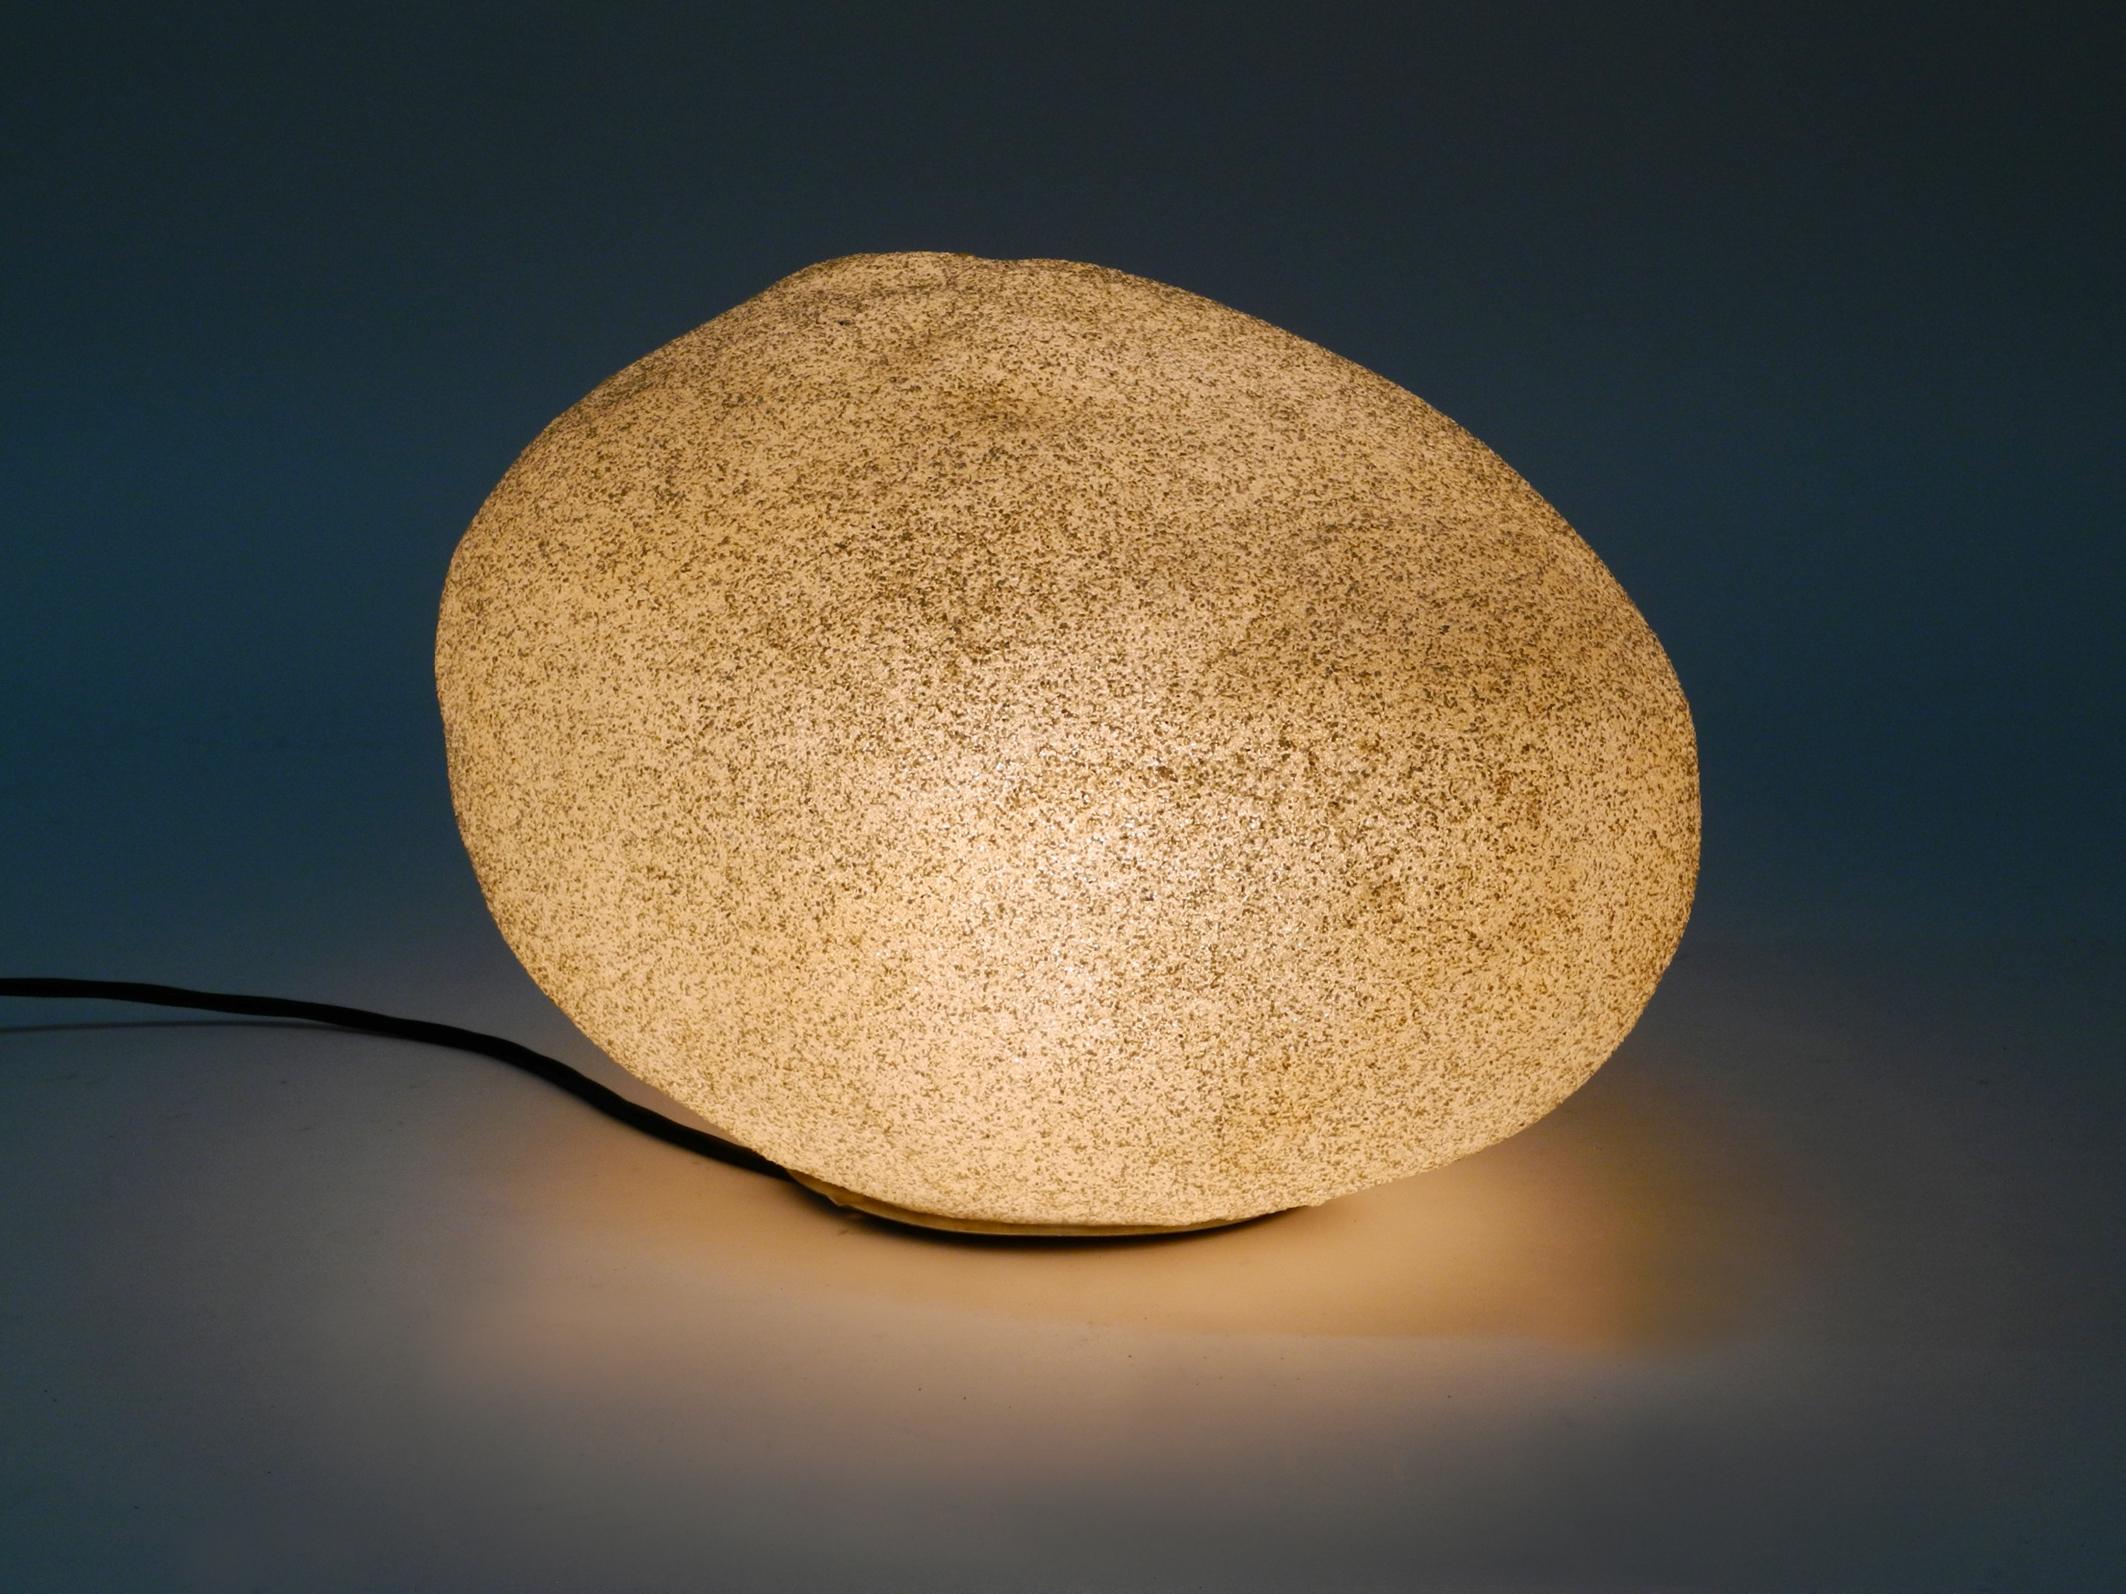 Space Age XL Tecta 1960s Floor Lamp Made of Fiberglass in the Shape of a Stone or Rock